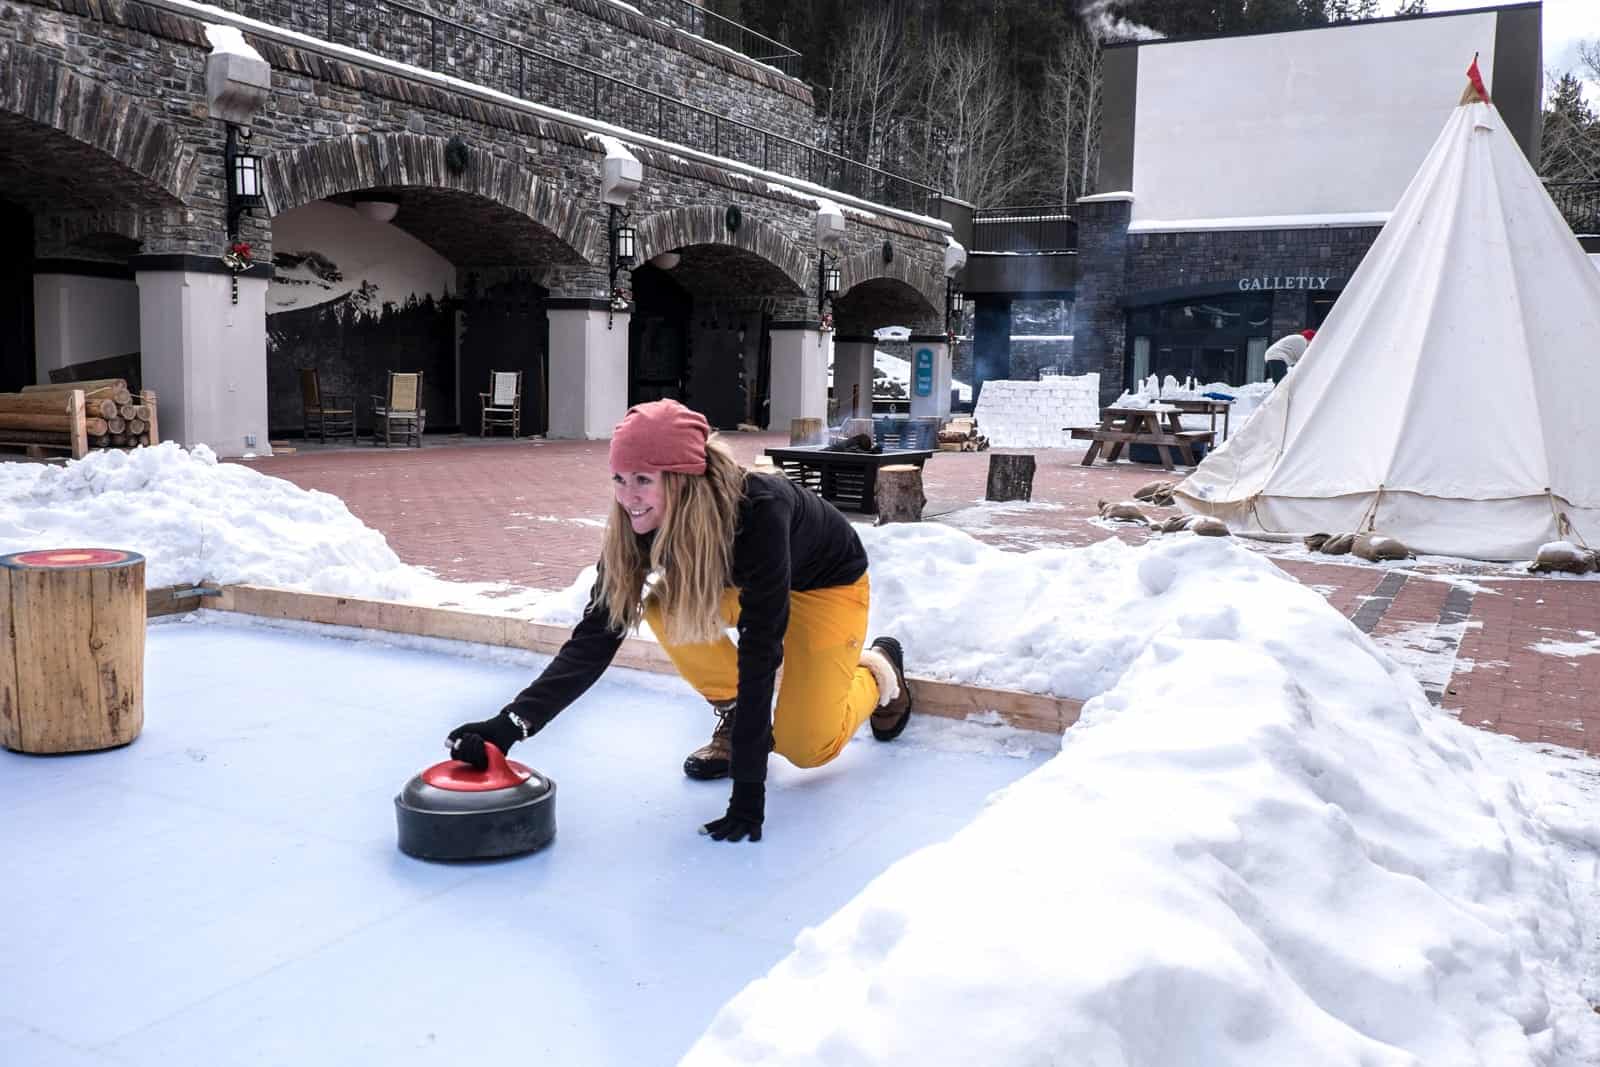 Woman tries Canadian winter sport of curling in Banff